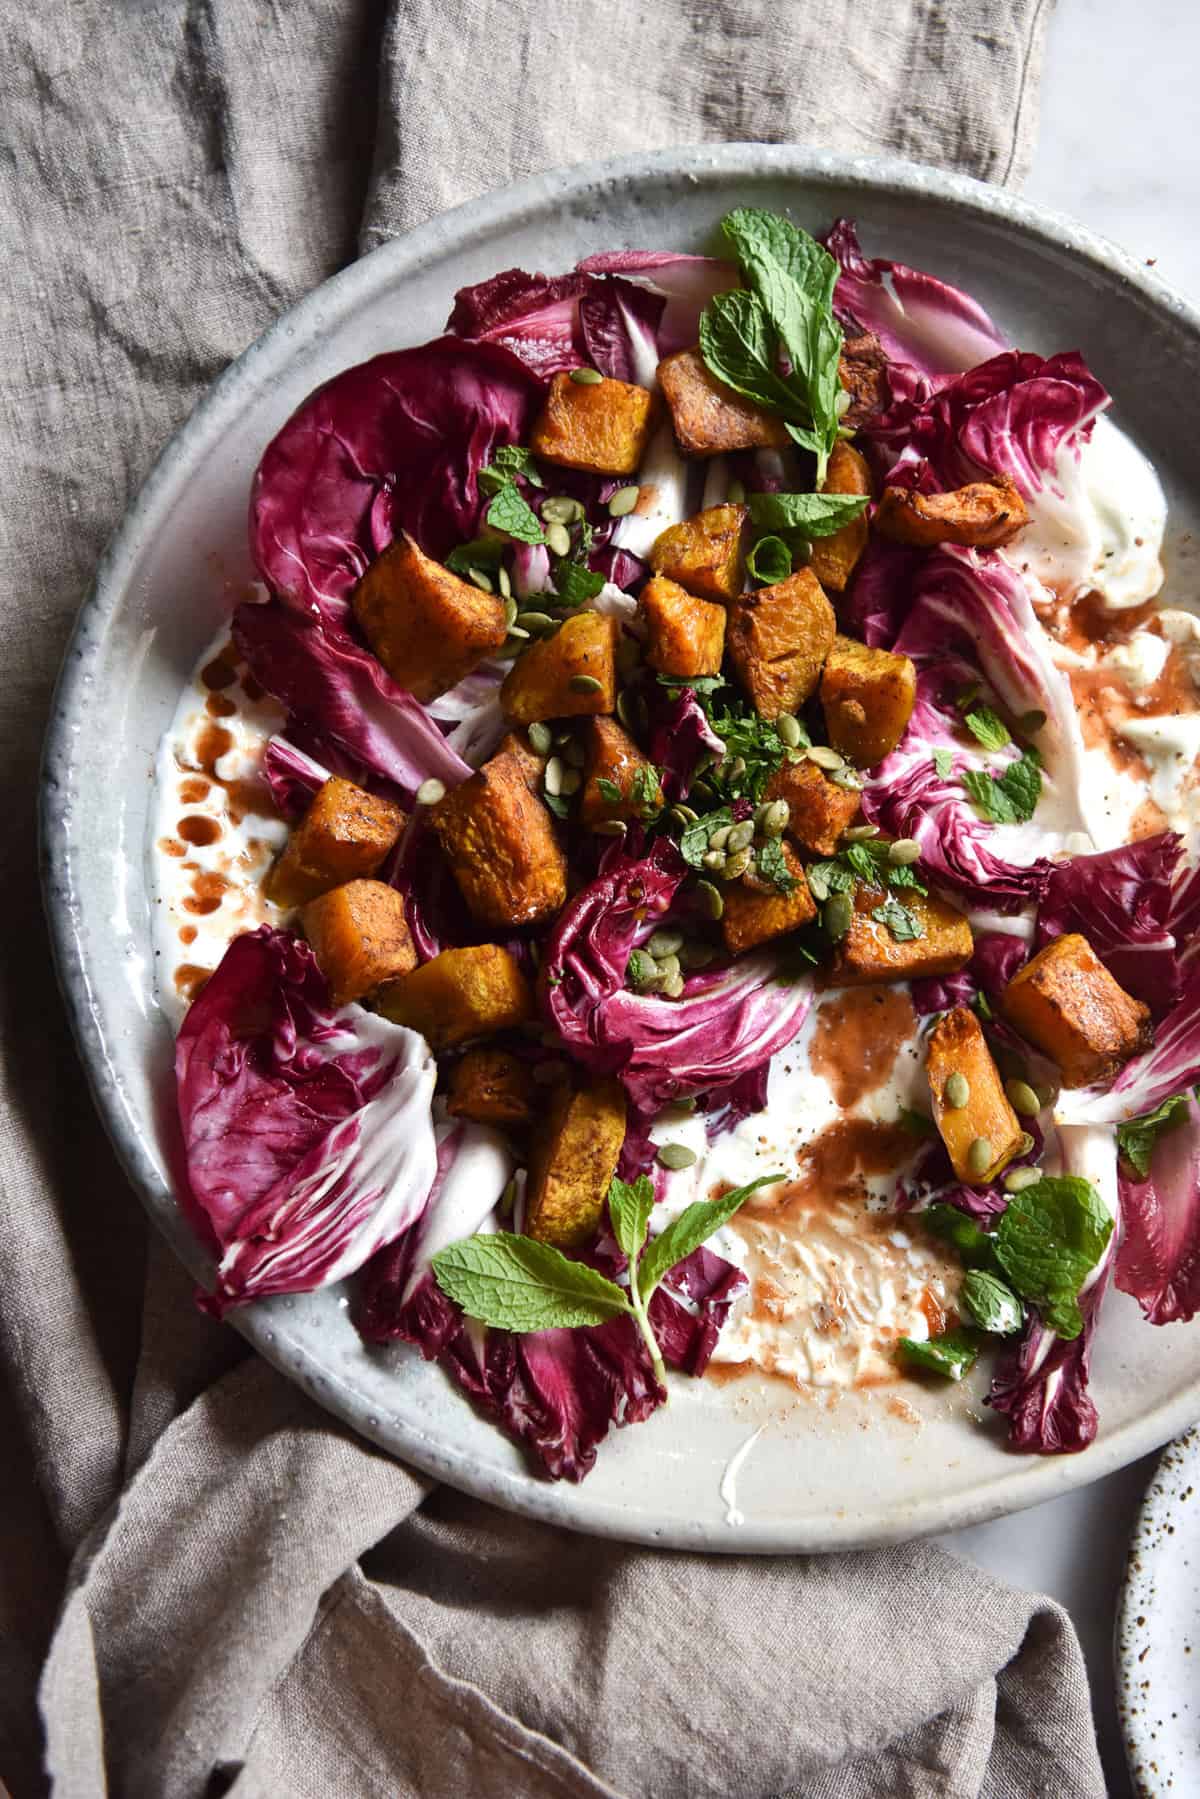 An aerial image of a spiced pumpkin salad on a bed of radicchio. The salad is on a white ceramic plate atop a beige linen tablecloth. 